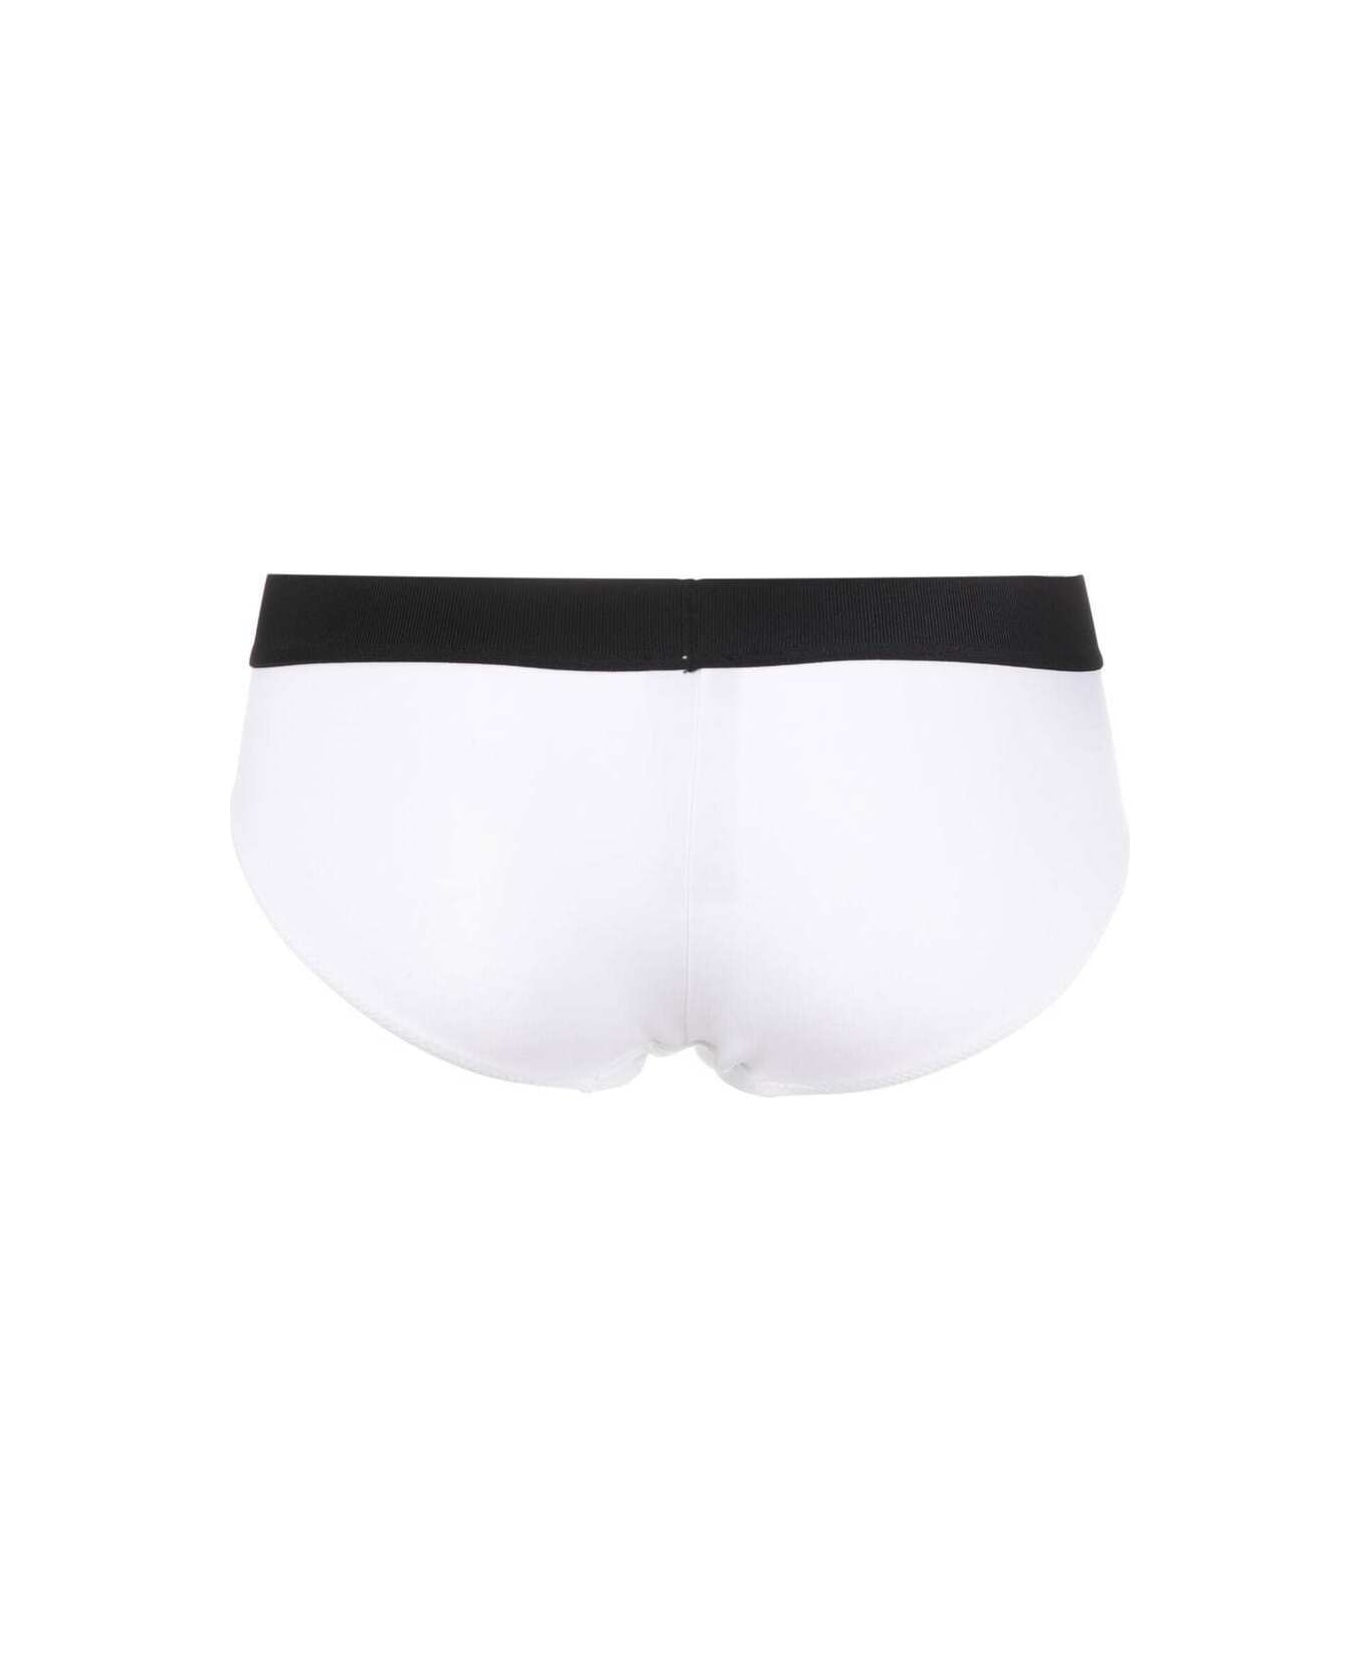 Tom Ford 'signature Boy Short' White Brief With Logo Waistband In Stretch-jersey Woman - White